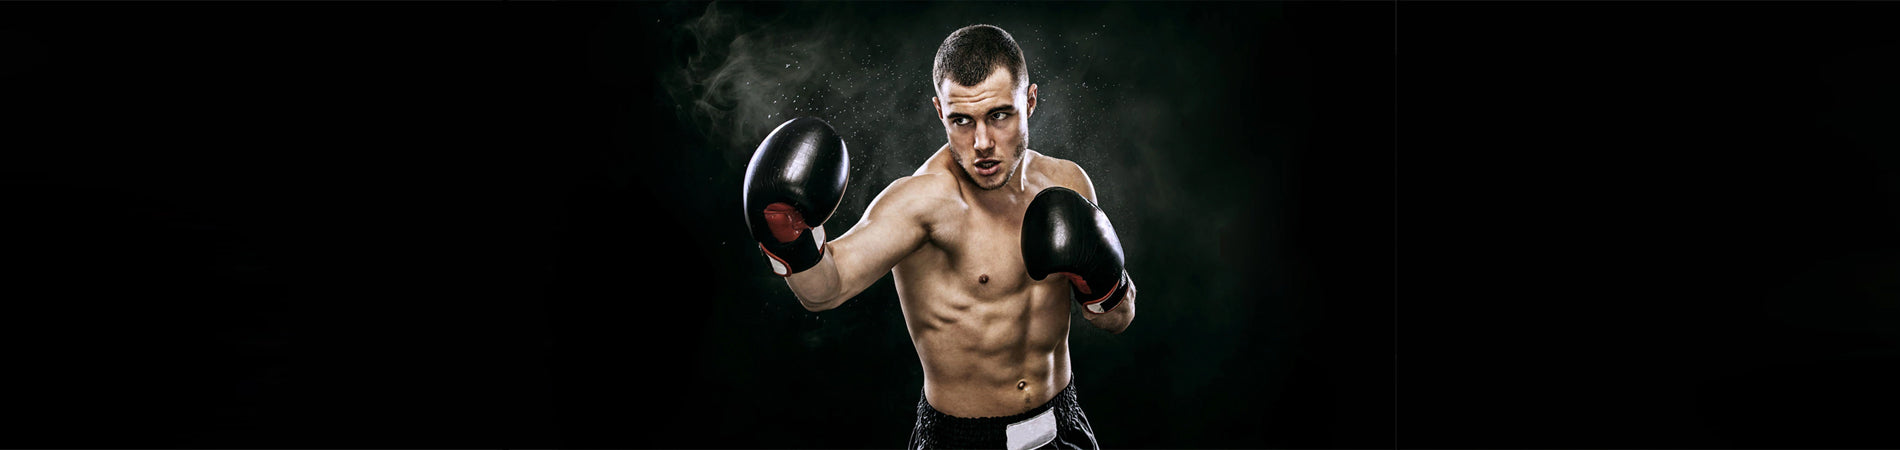 Best Boxing Workouts for Beginners to Polish Your Techniques and Body Conditioning